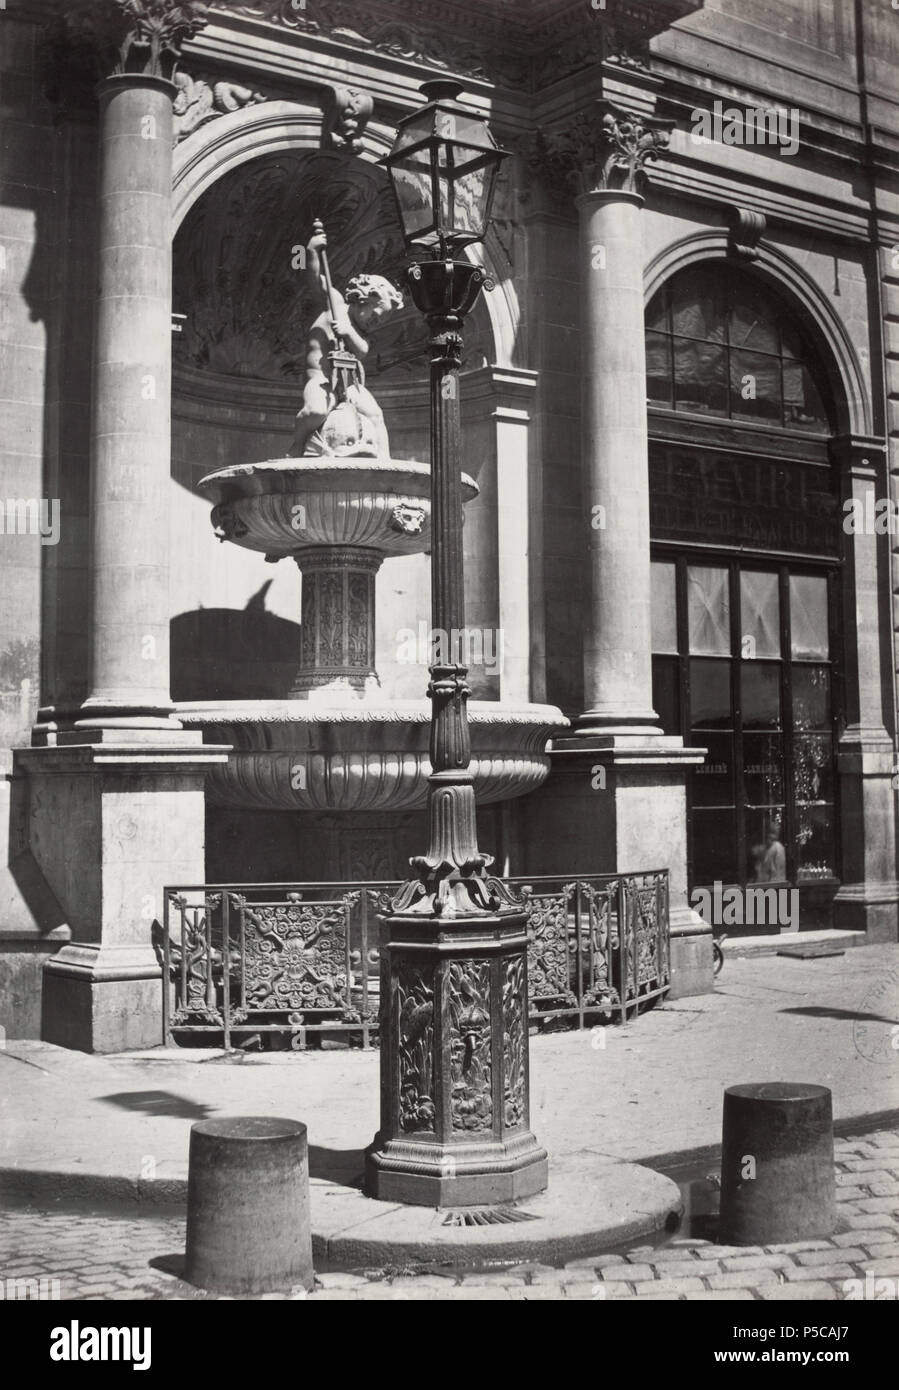 Fontaine Gaillon. no.31. English: Single globe with iron lamp post mounted on carved iron base, tap in base. A fountain in a wall niche with statue of a small boy spearing fish with a trident. 1878. N/A 327 Charles Marville, Fontaine Gaillon, 1878 Stock Photo